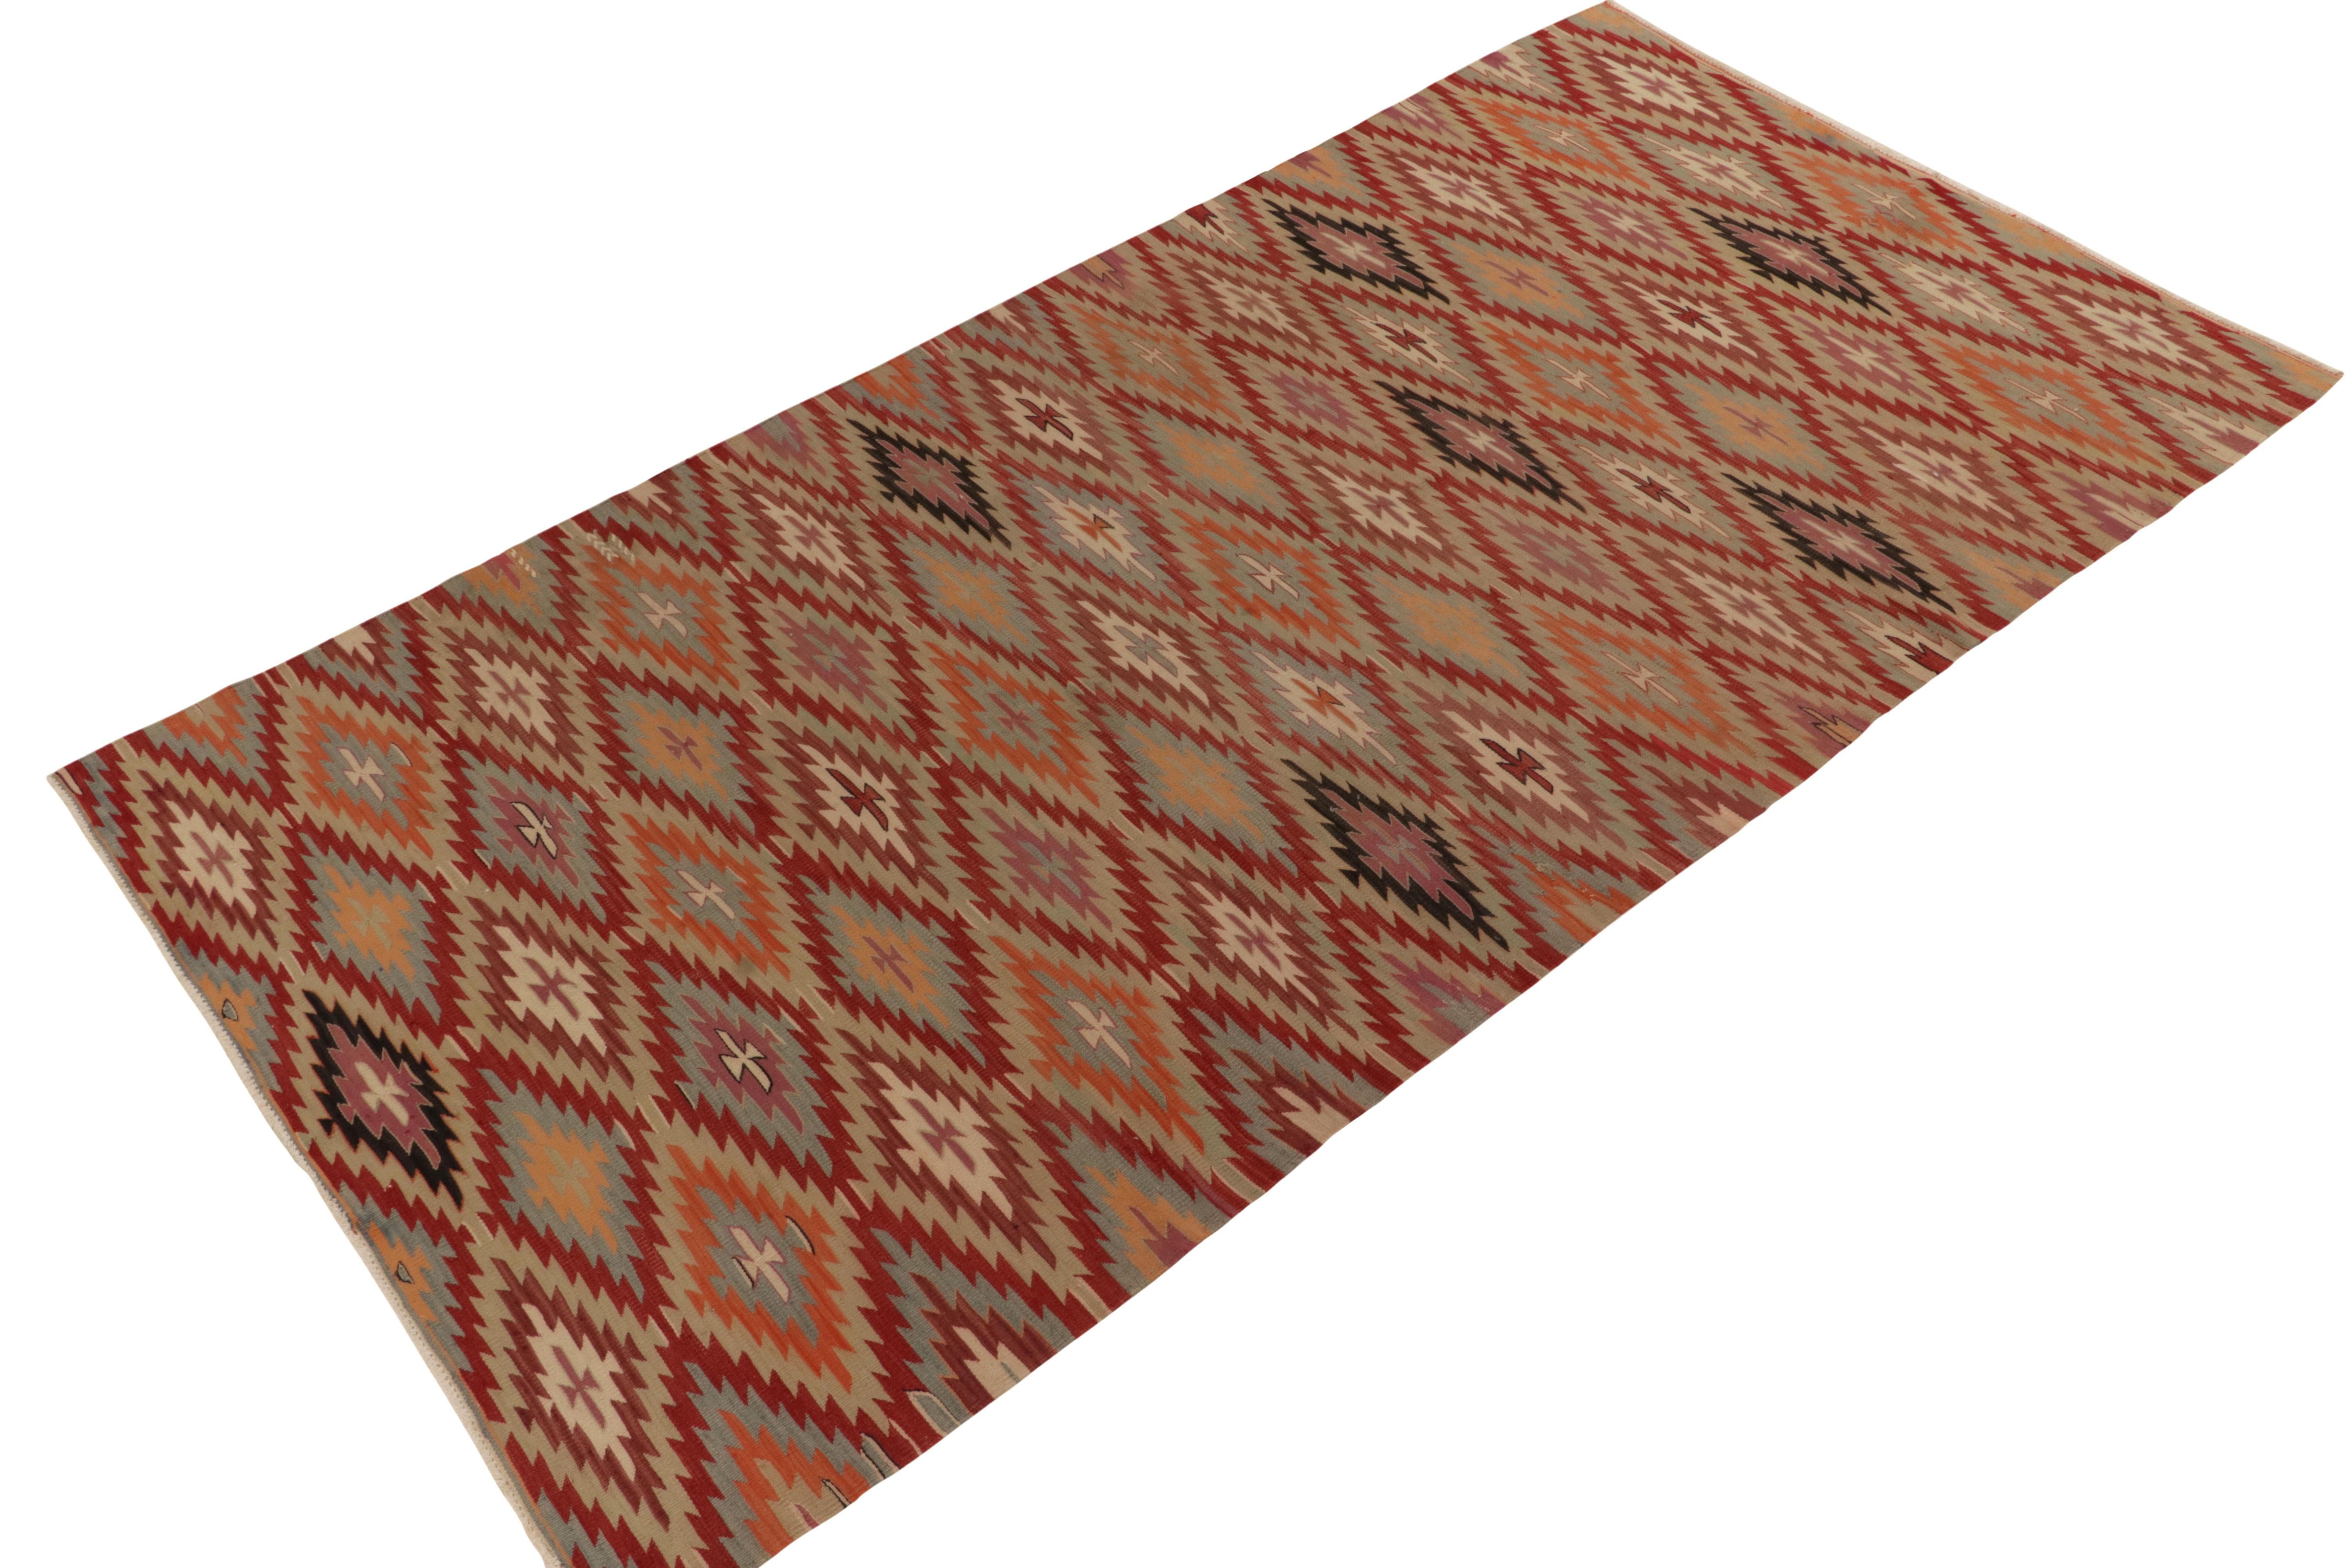 Handwoven in wool from Turkey circa 1950-1960, a vintage kilim among R&K Principal Josh Nazmiyal’s curated tribal flat weaves. 

On the Provenance: The rug revels in the rustic charm of tribal repetition in classic reds, oranges, blues and other